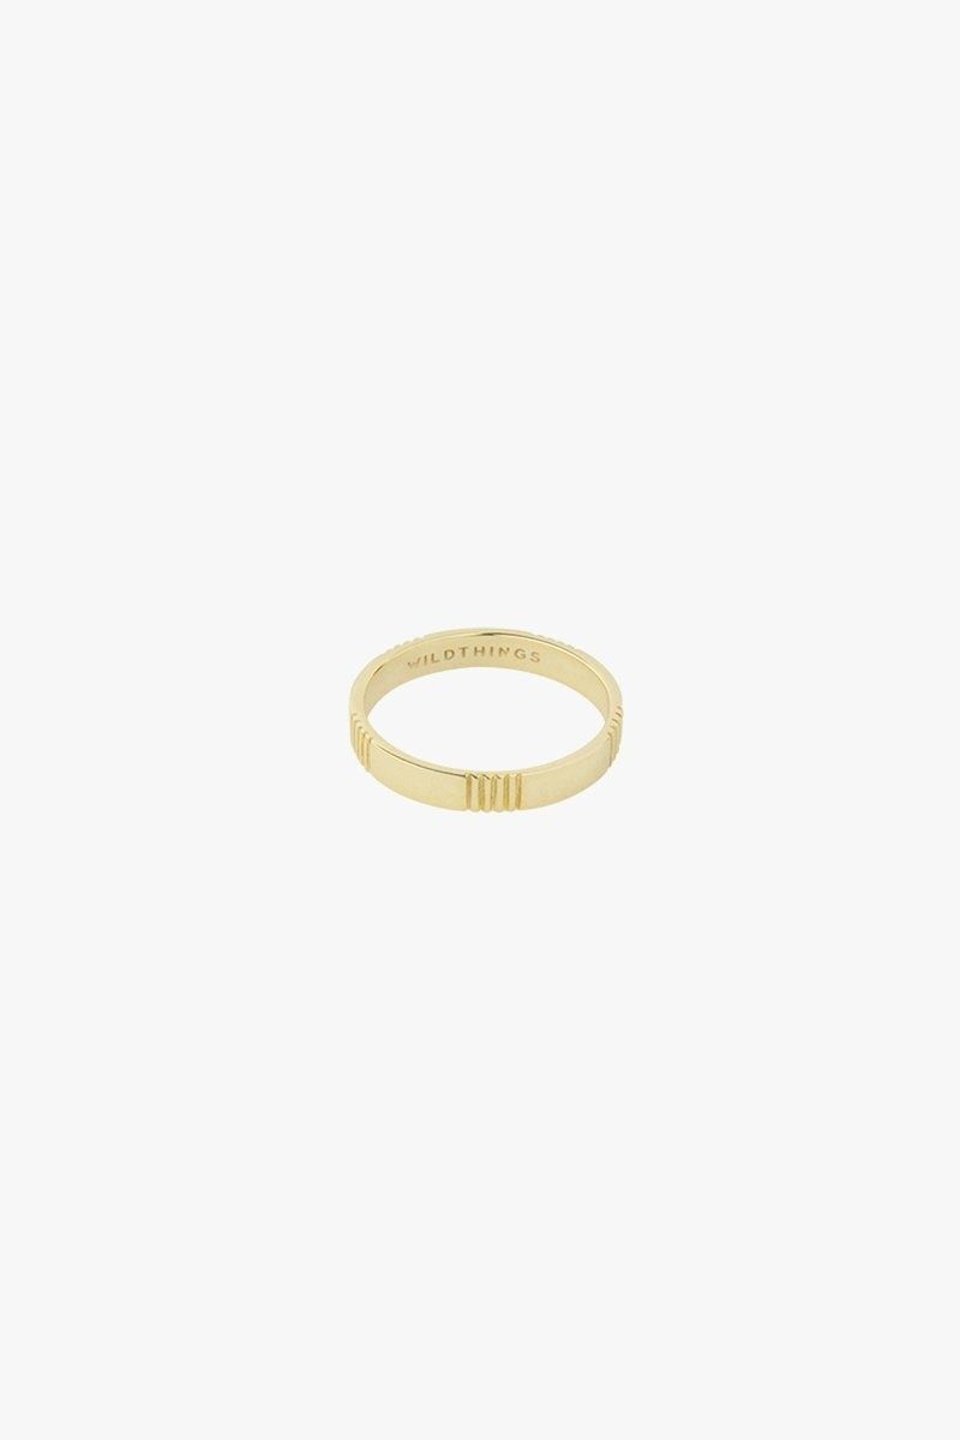 Wildthings Five Lines Ring - Gold